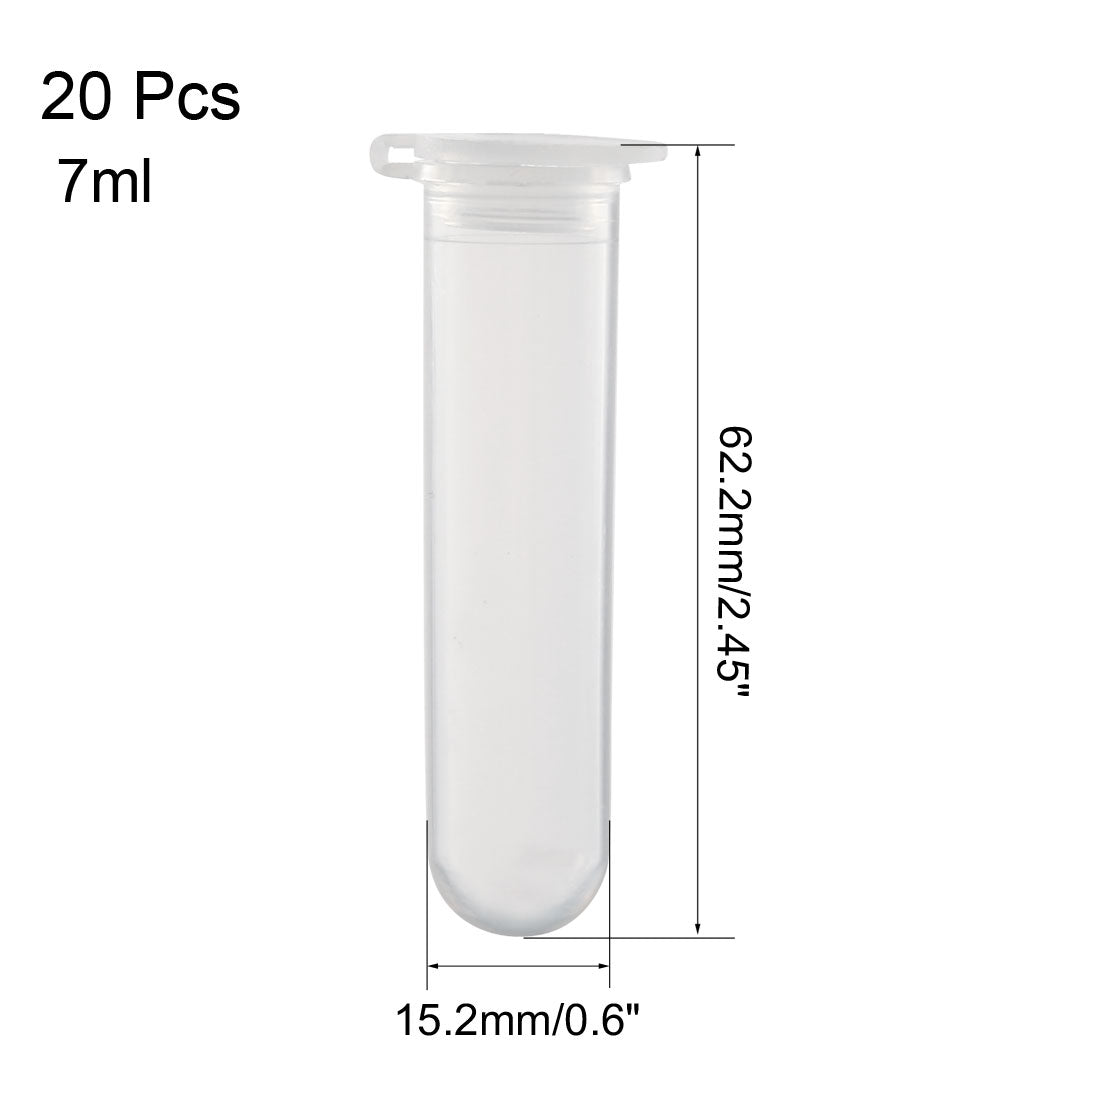 uxcell Uxcell 20 Pcs 7ml Plastic Centrifuge Tubes with Attached Cap, Round Bottom